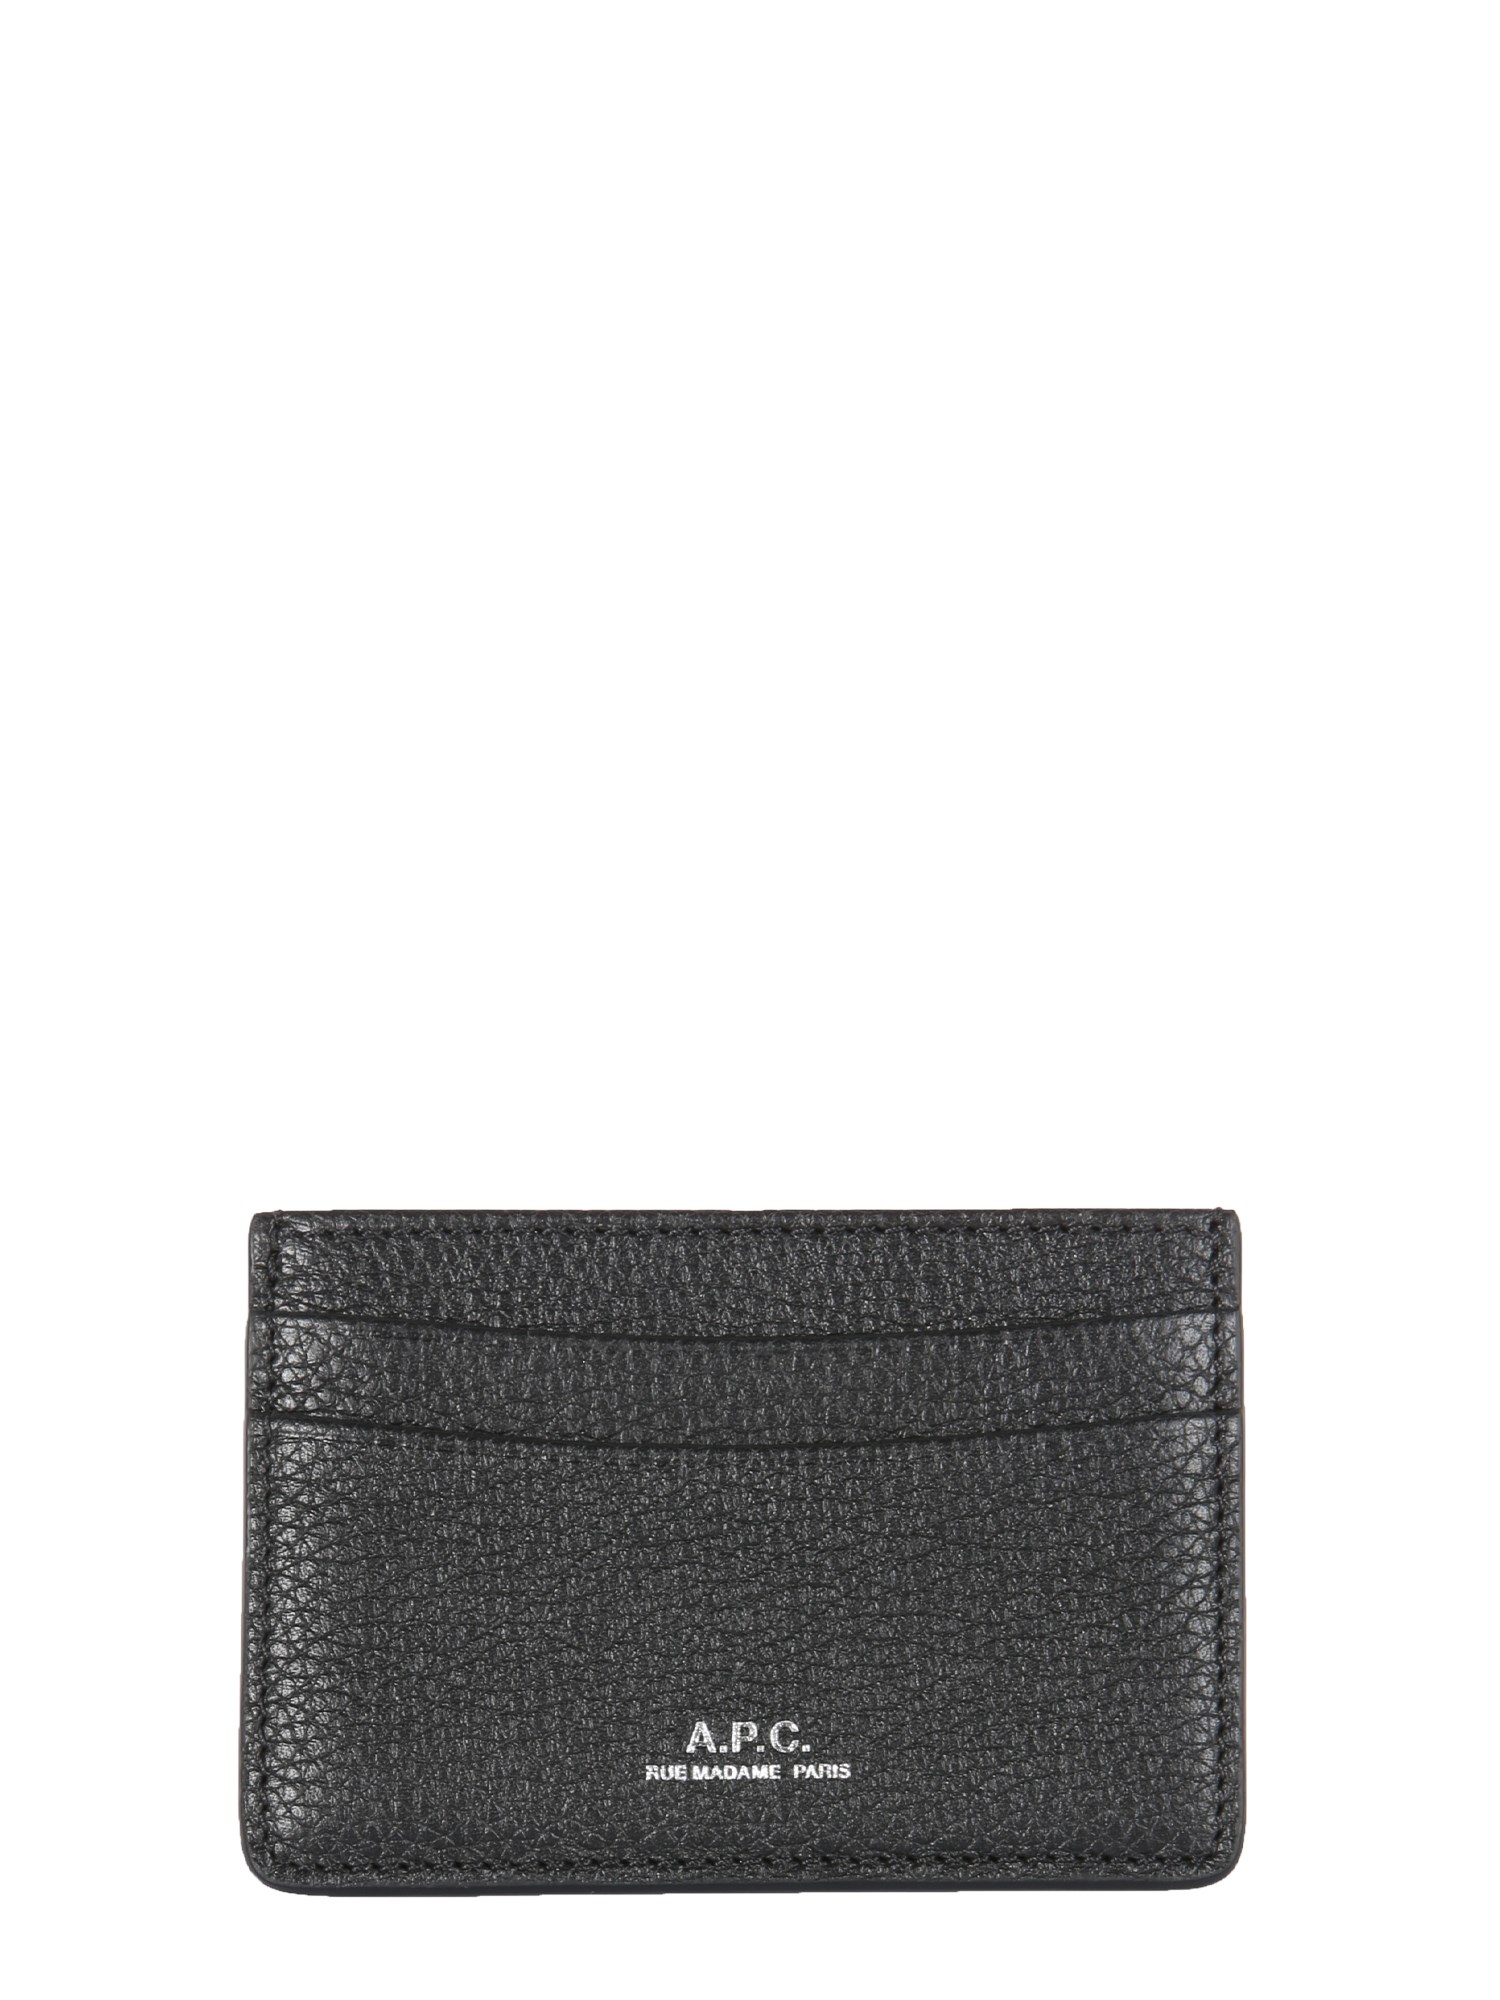 a.p.c. andré card holder